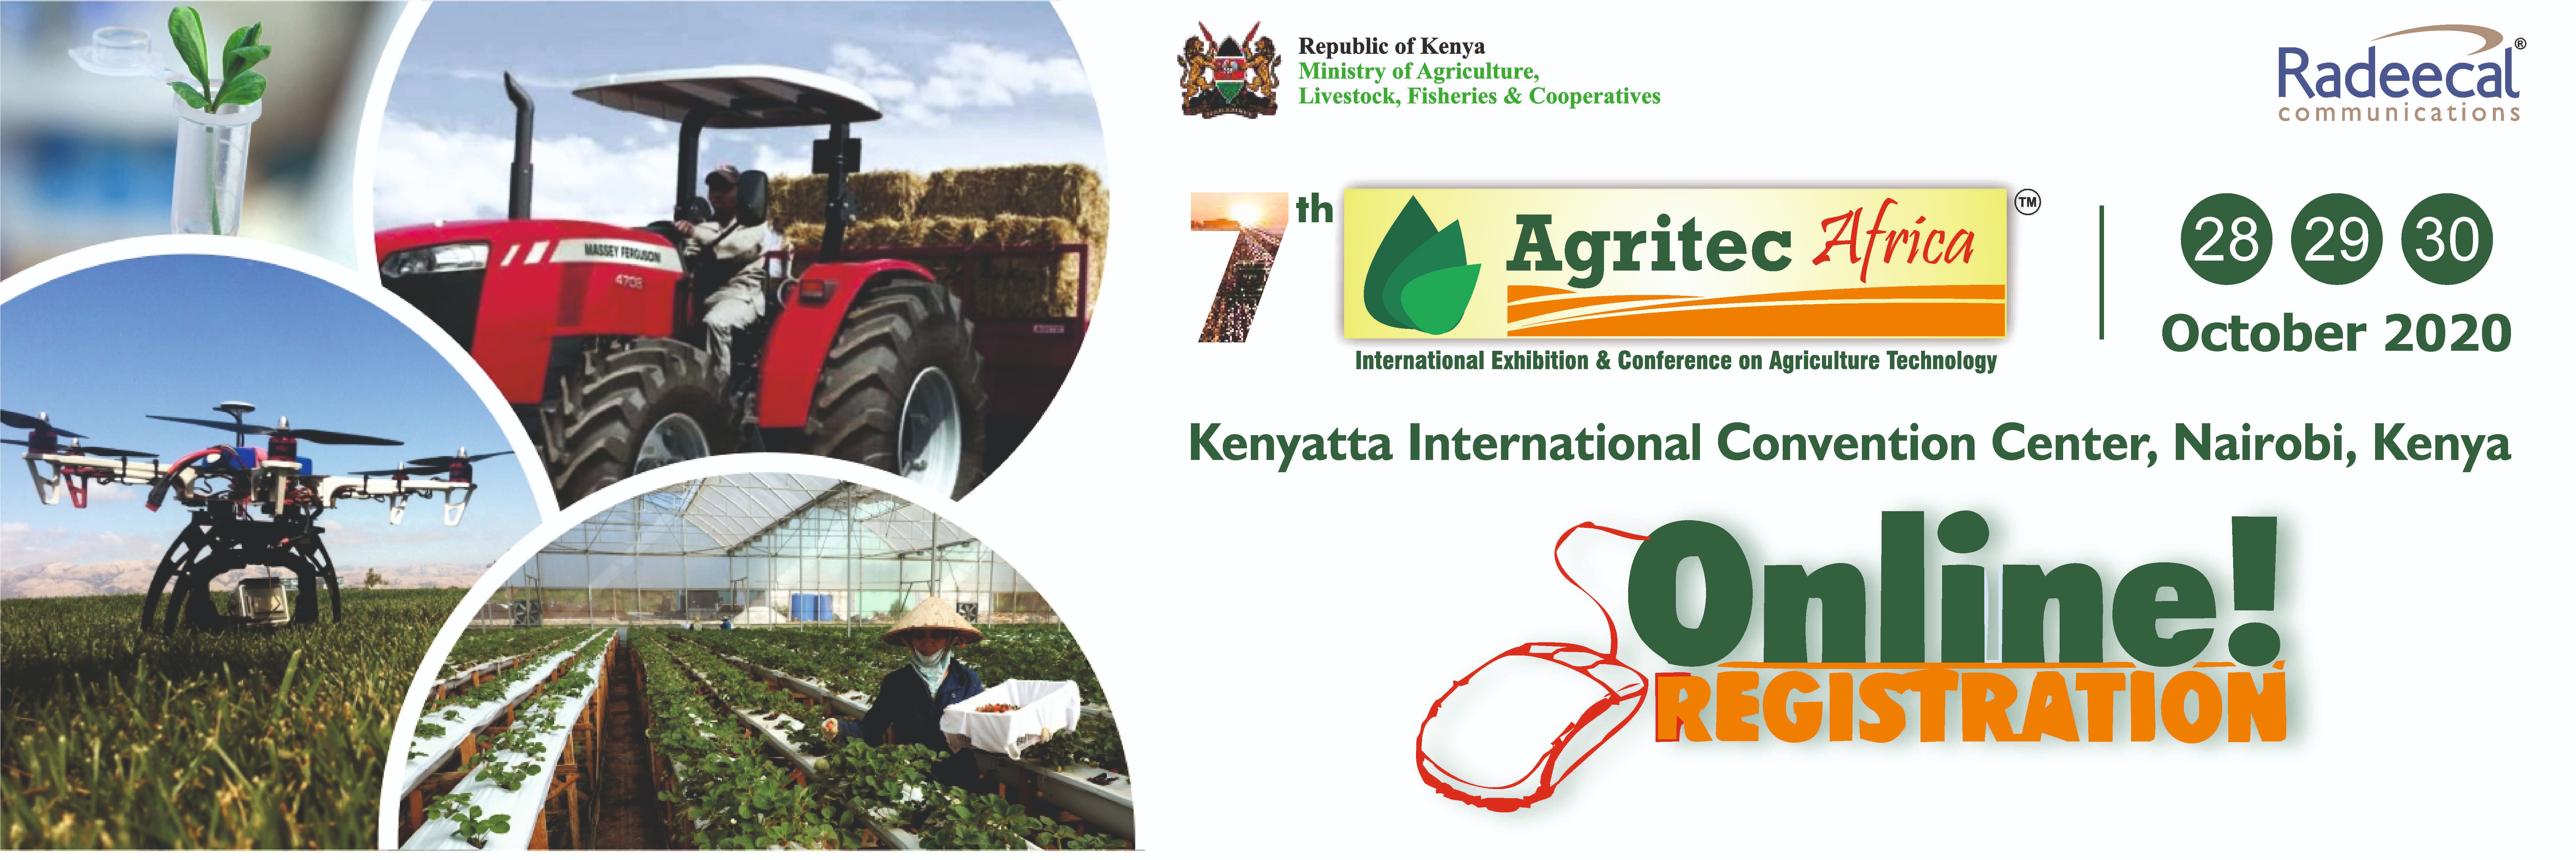 7th International Exhibition & Conference on Agriculture Technologies, Nairobi, Kenya